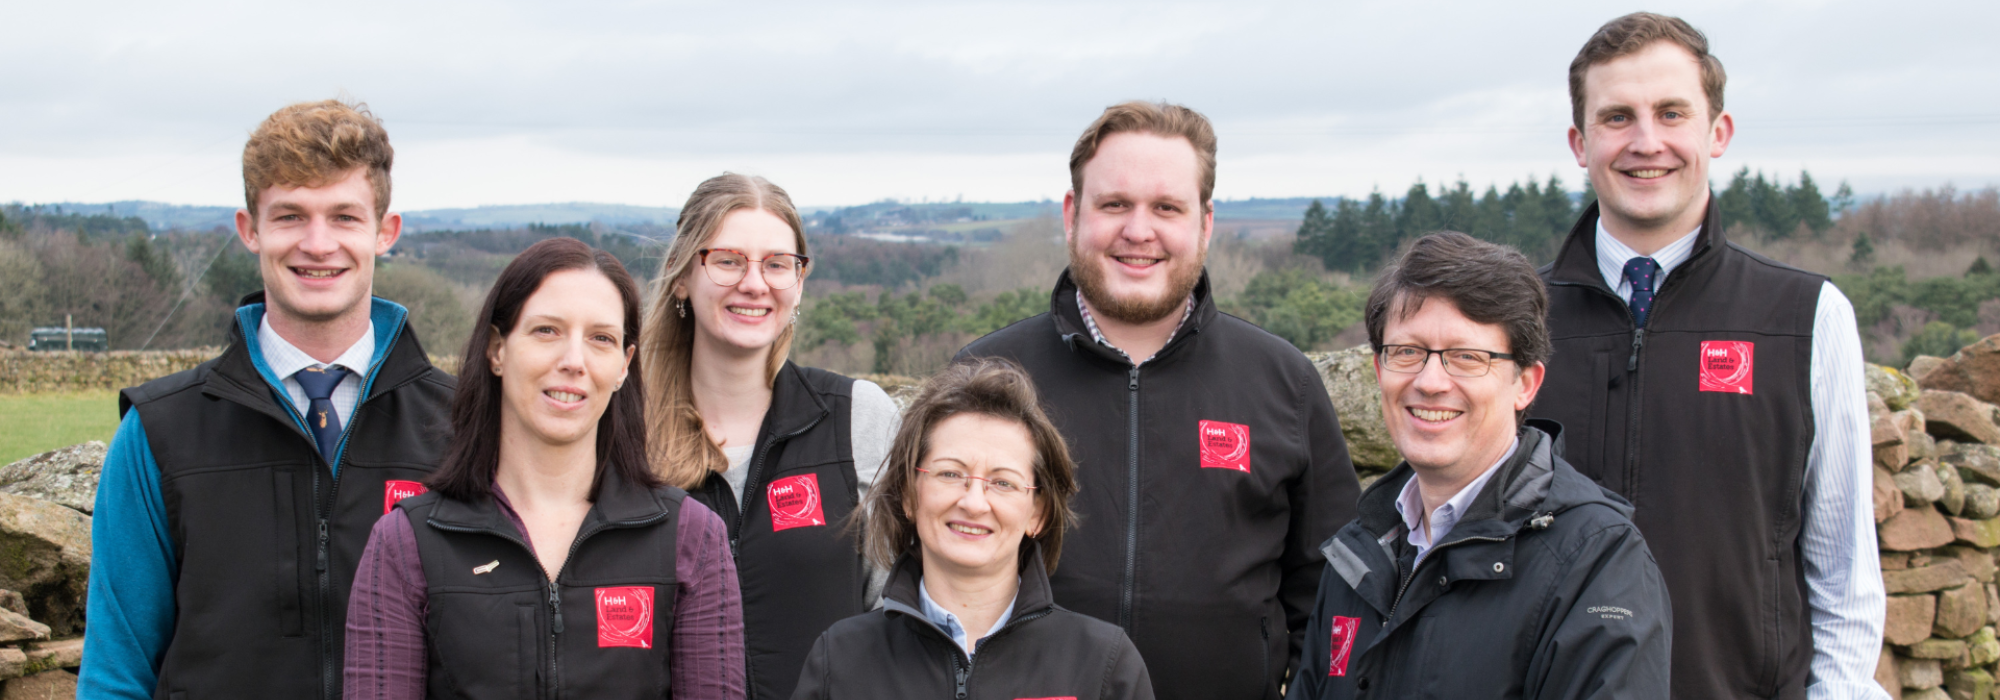 H&H Land & Estates Environment & Forestry team consisting of Chris Gill, Sarah Radcliffe, Sarah Collier, Tracey Jackson, Will Livesey, David Morley & Nick Mullins